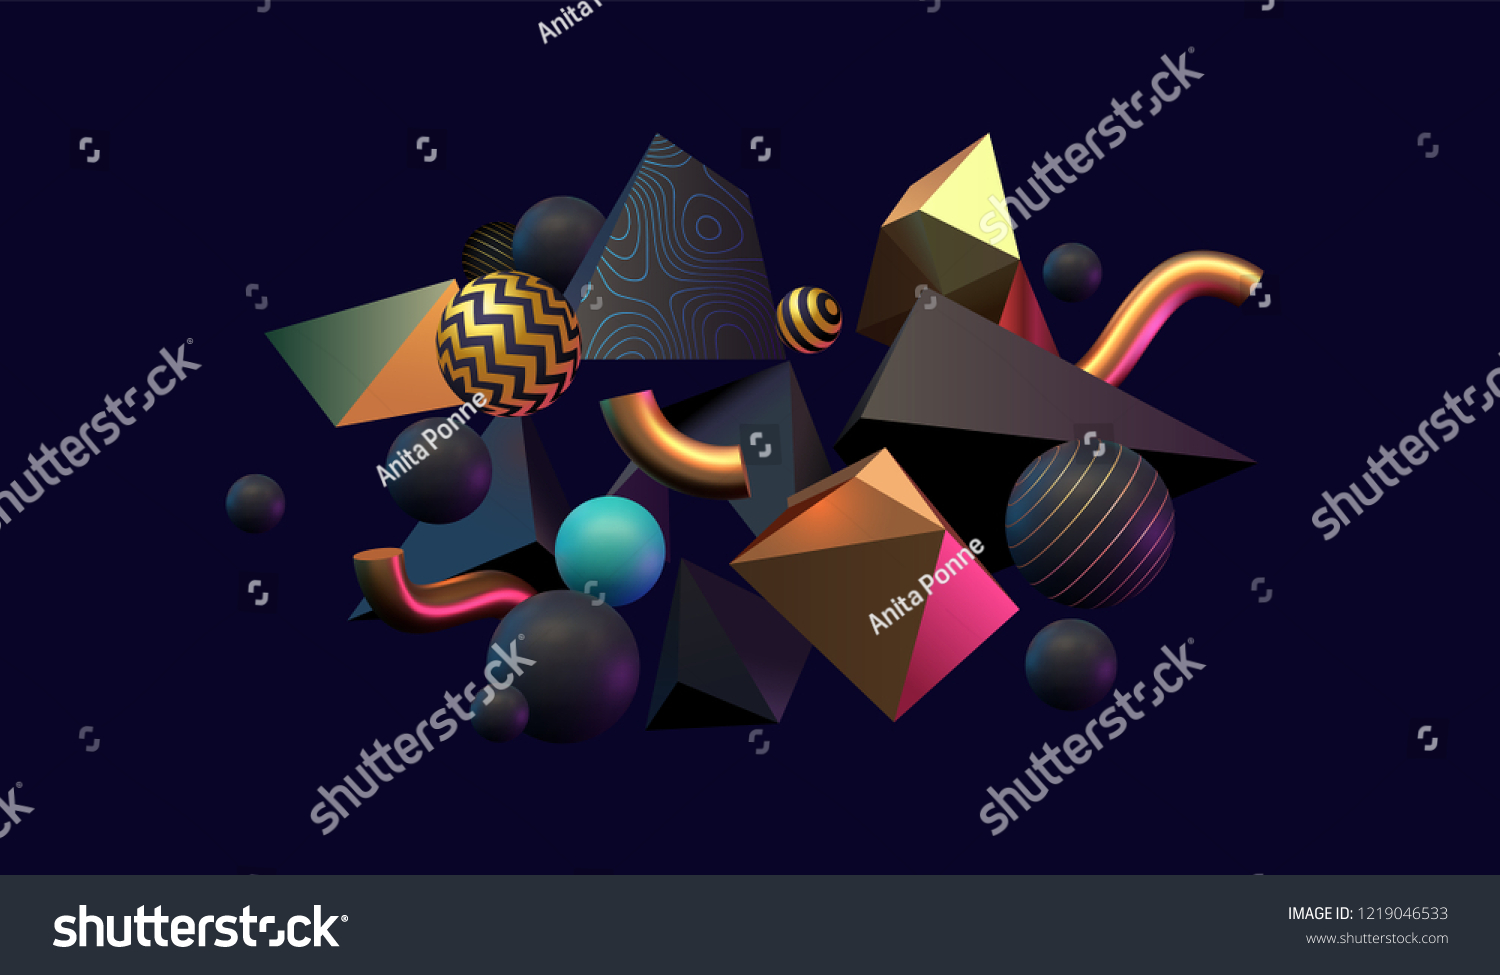 3D abstract black, gold and teal colored geometric shapes. Memphis inspired. Eps10 vector #1219046533